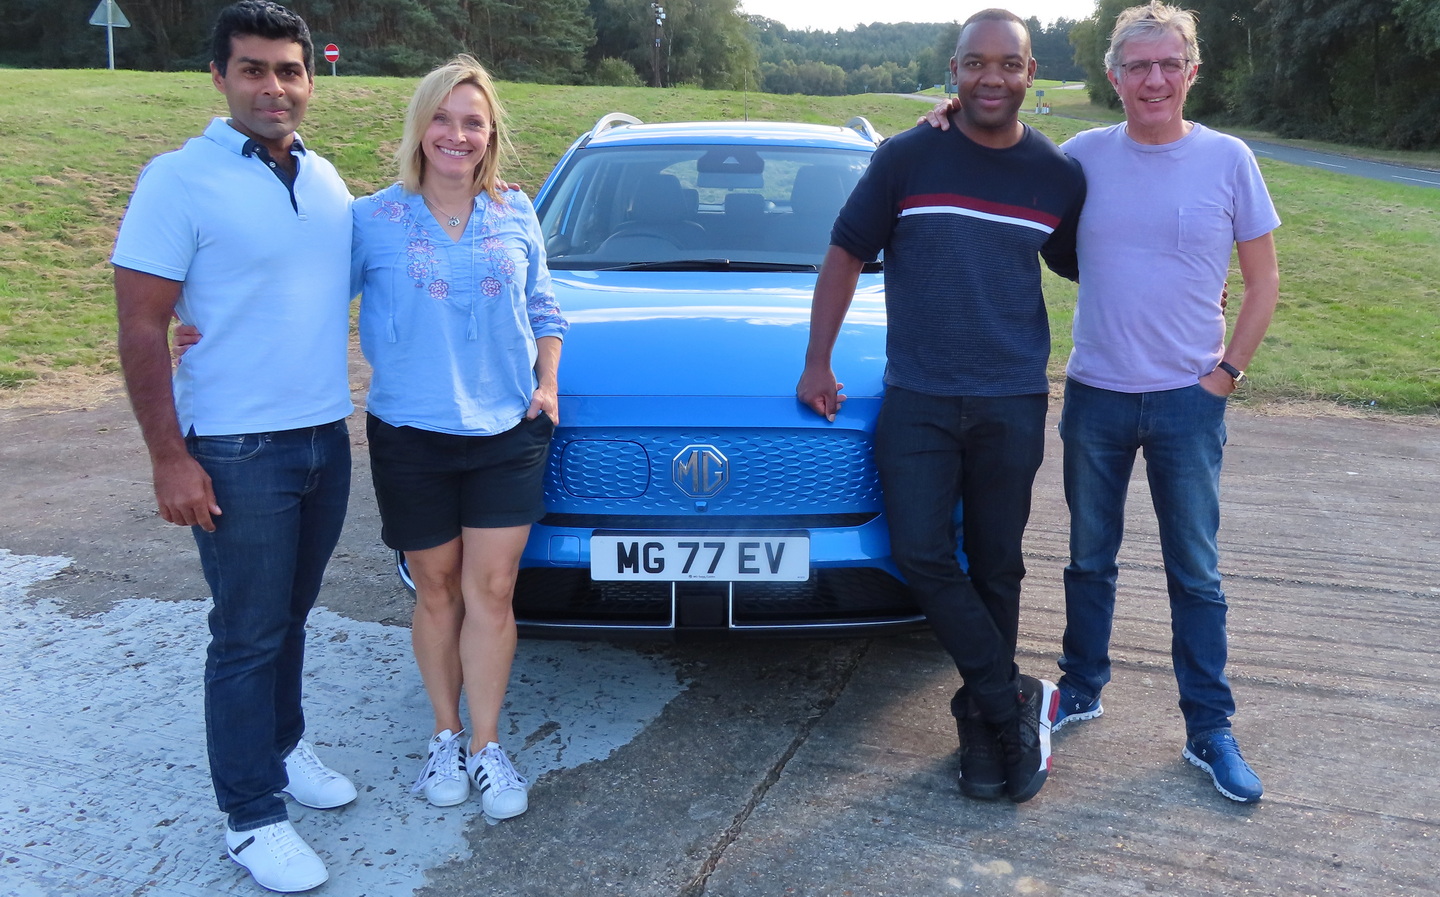 The presenter team for the new series of Fifth Gear